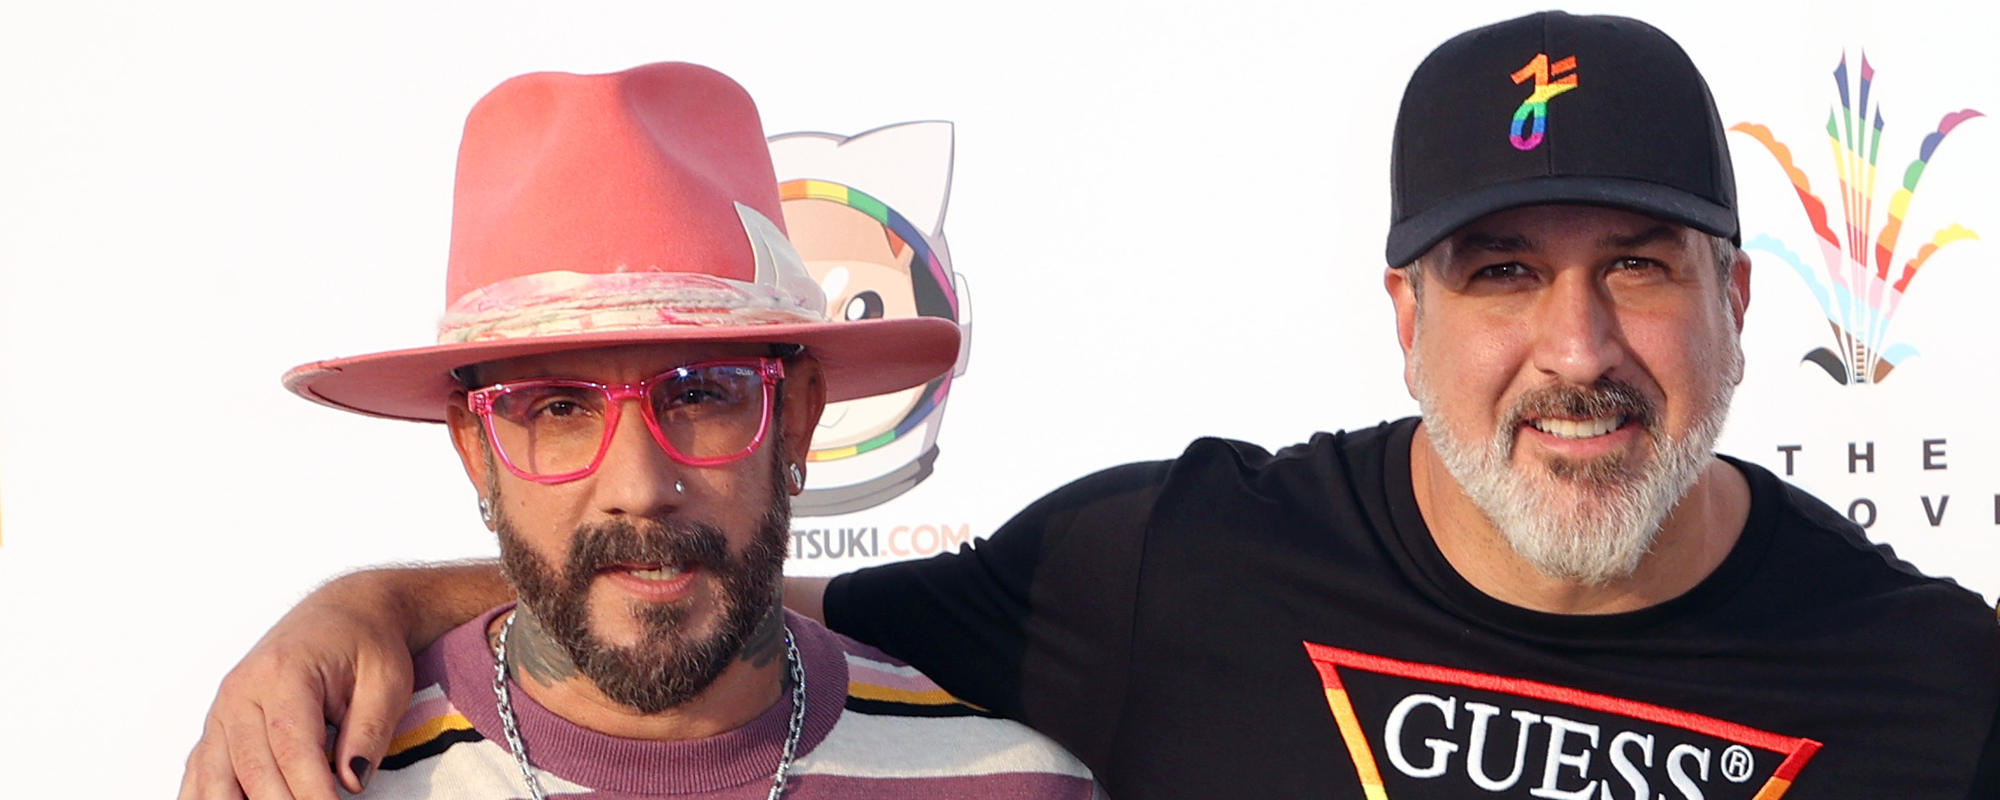 Joey Fatone Shares Backstreet Boys Song He Can’t Wait To Perform With AJ McLean, Says “People Loved It”